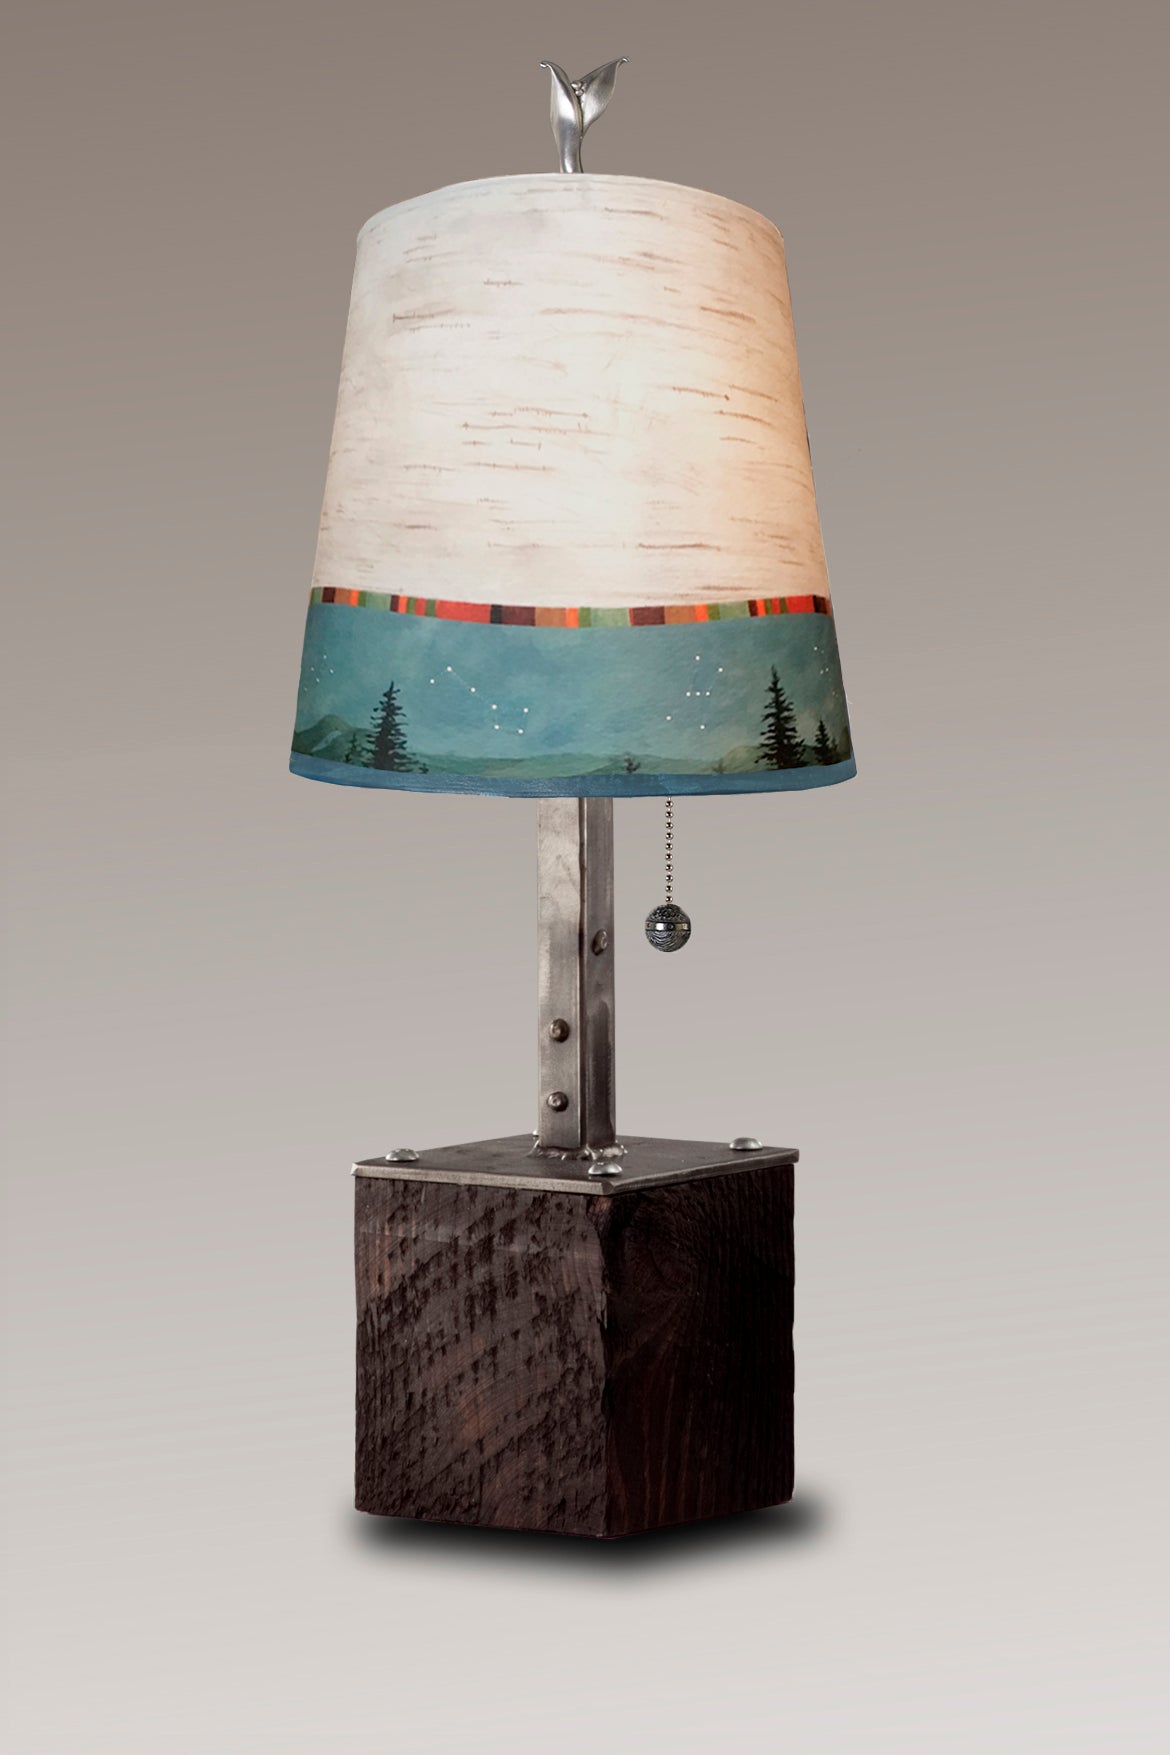 Steel Table Lamp on Reclaimed Wood with Small Drum Shade in Birch Midnight